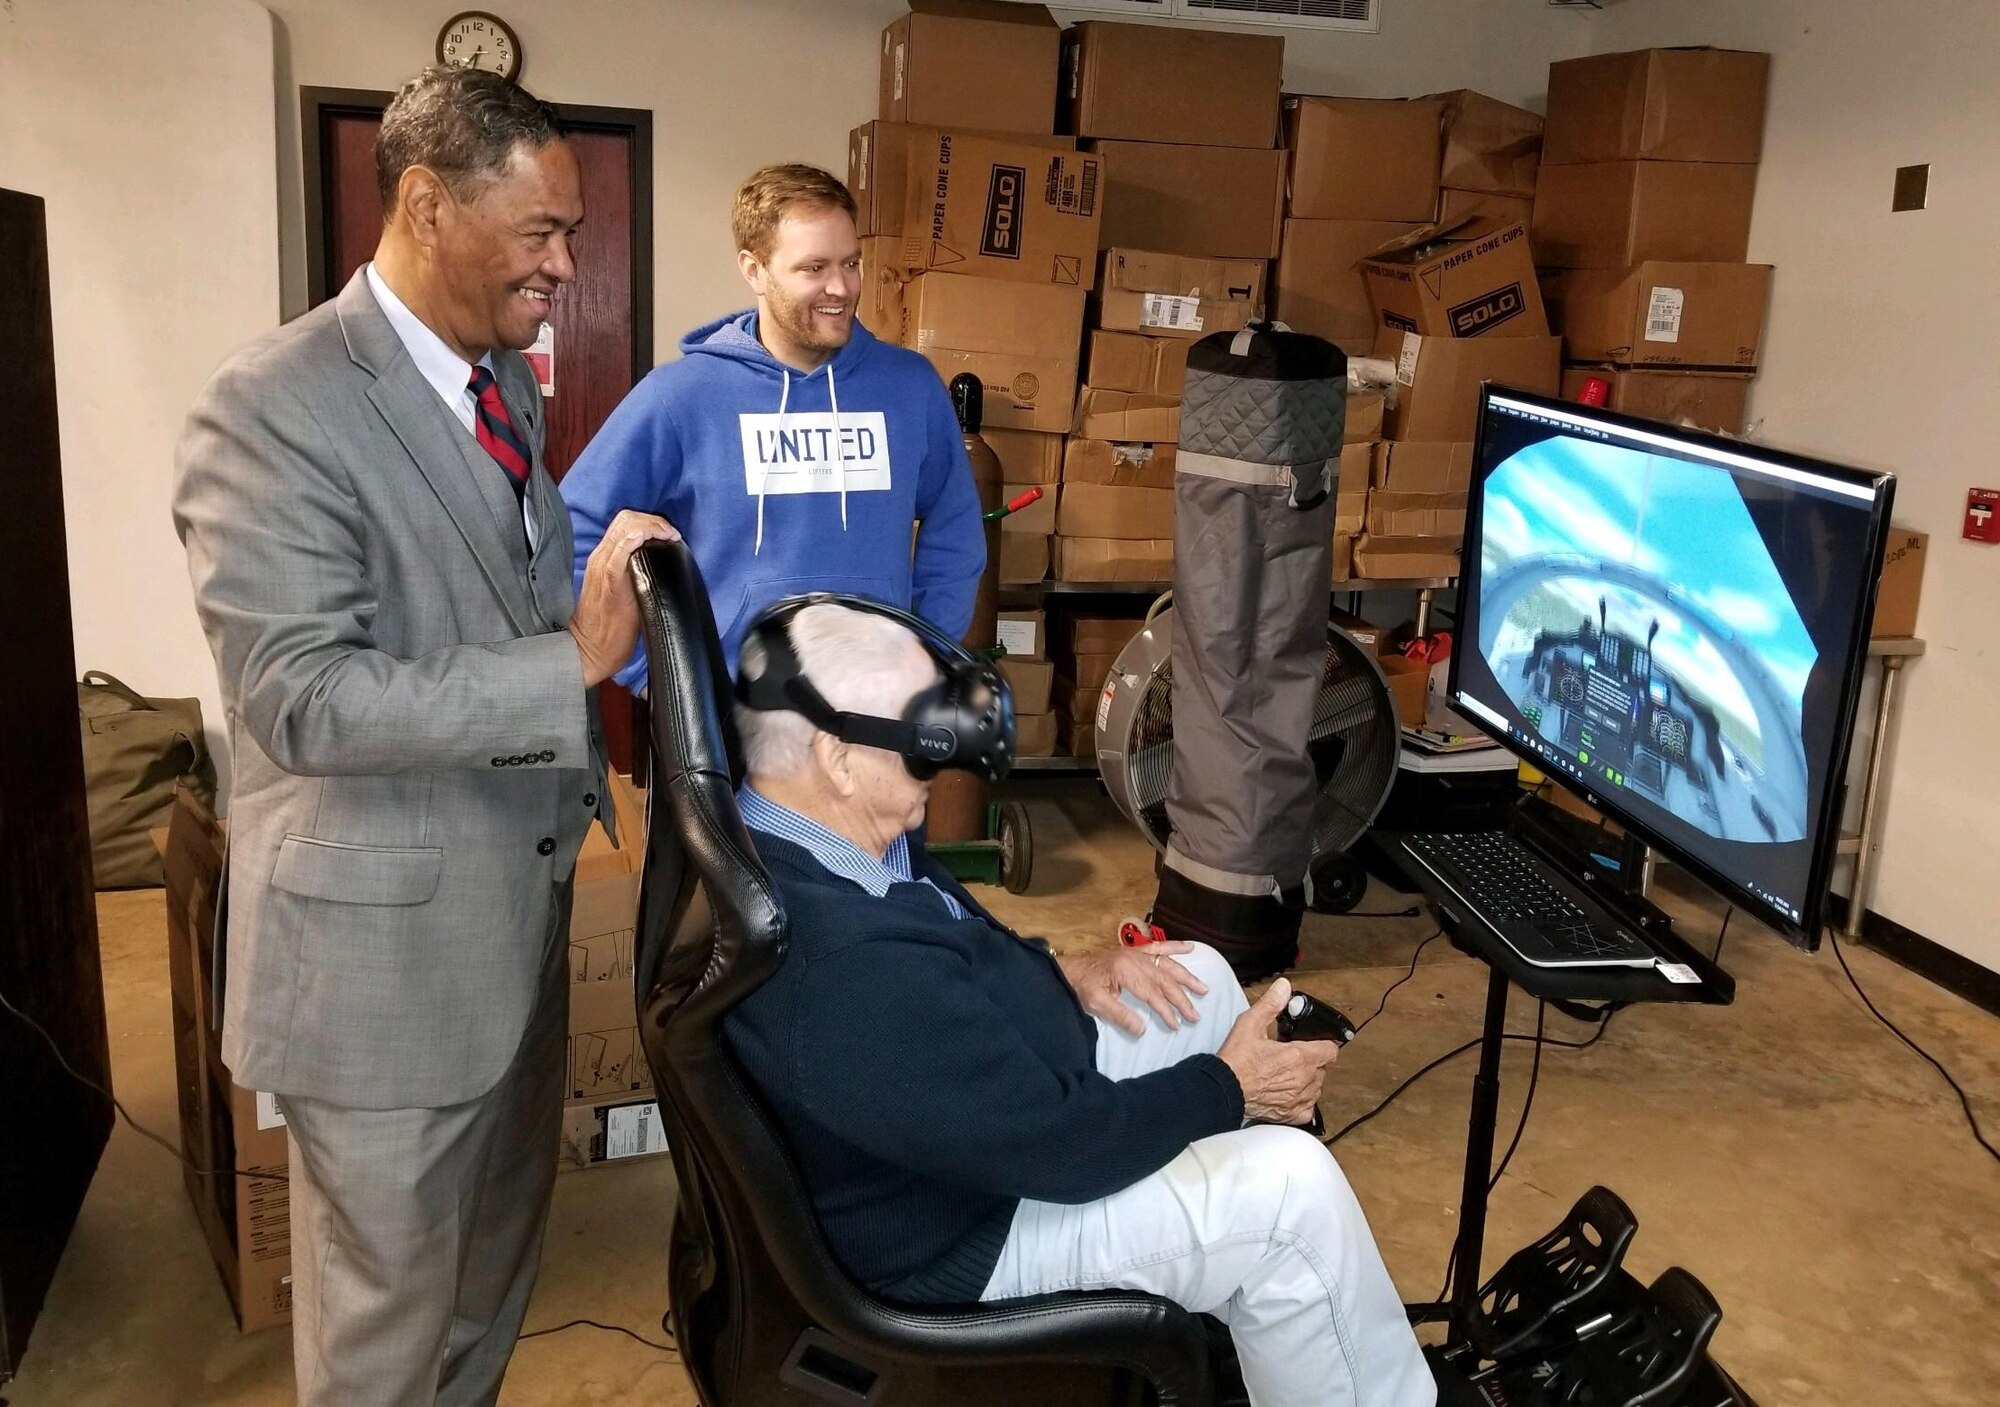 Retired Air Force Lt. Col. George Hardy (left), a former Tuskegee Airman, flies the VR flight simulator.